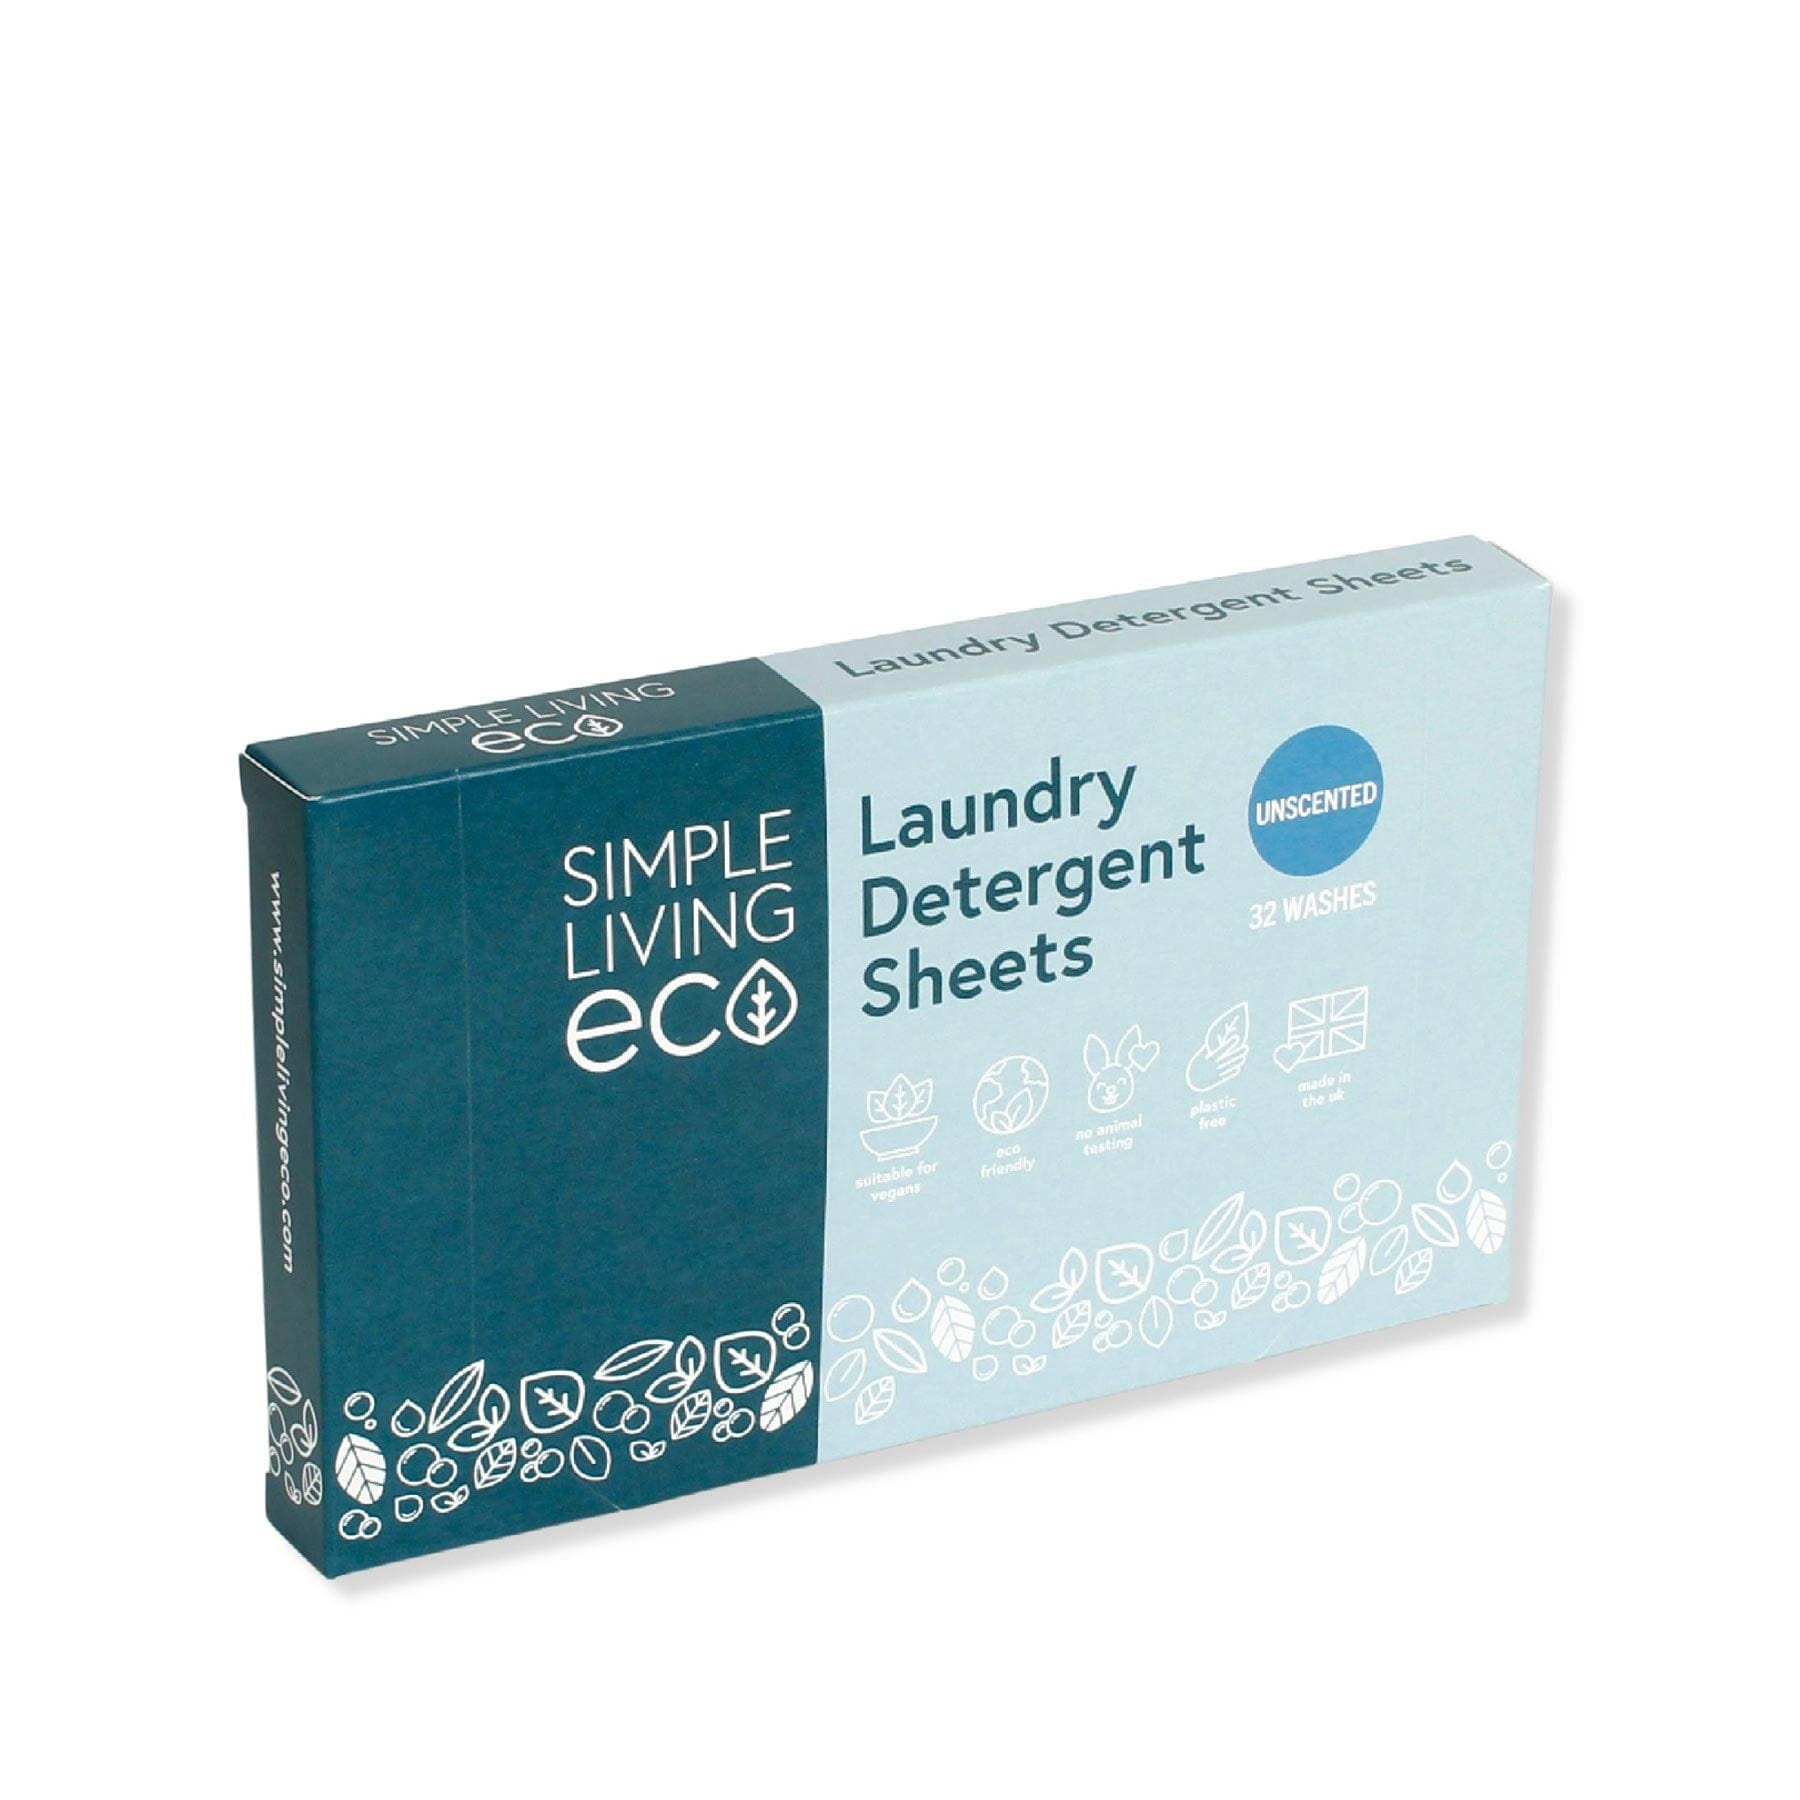 Laundry detergent sheets unscented 32pk